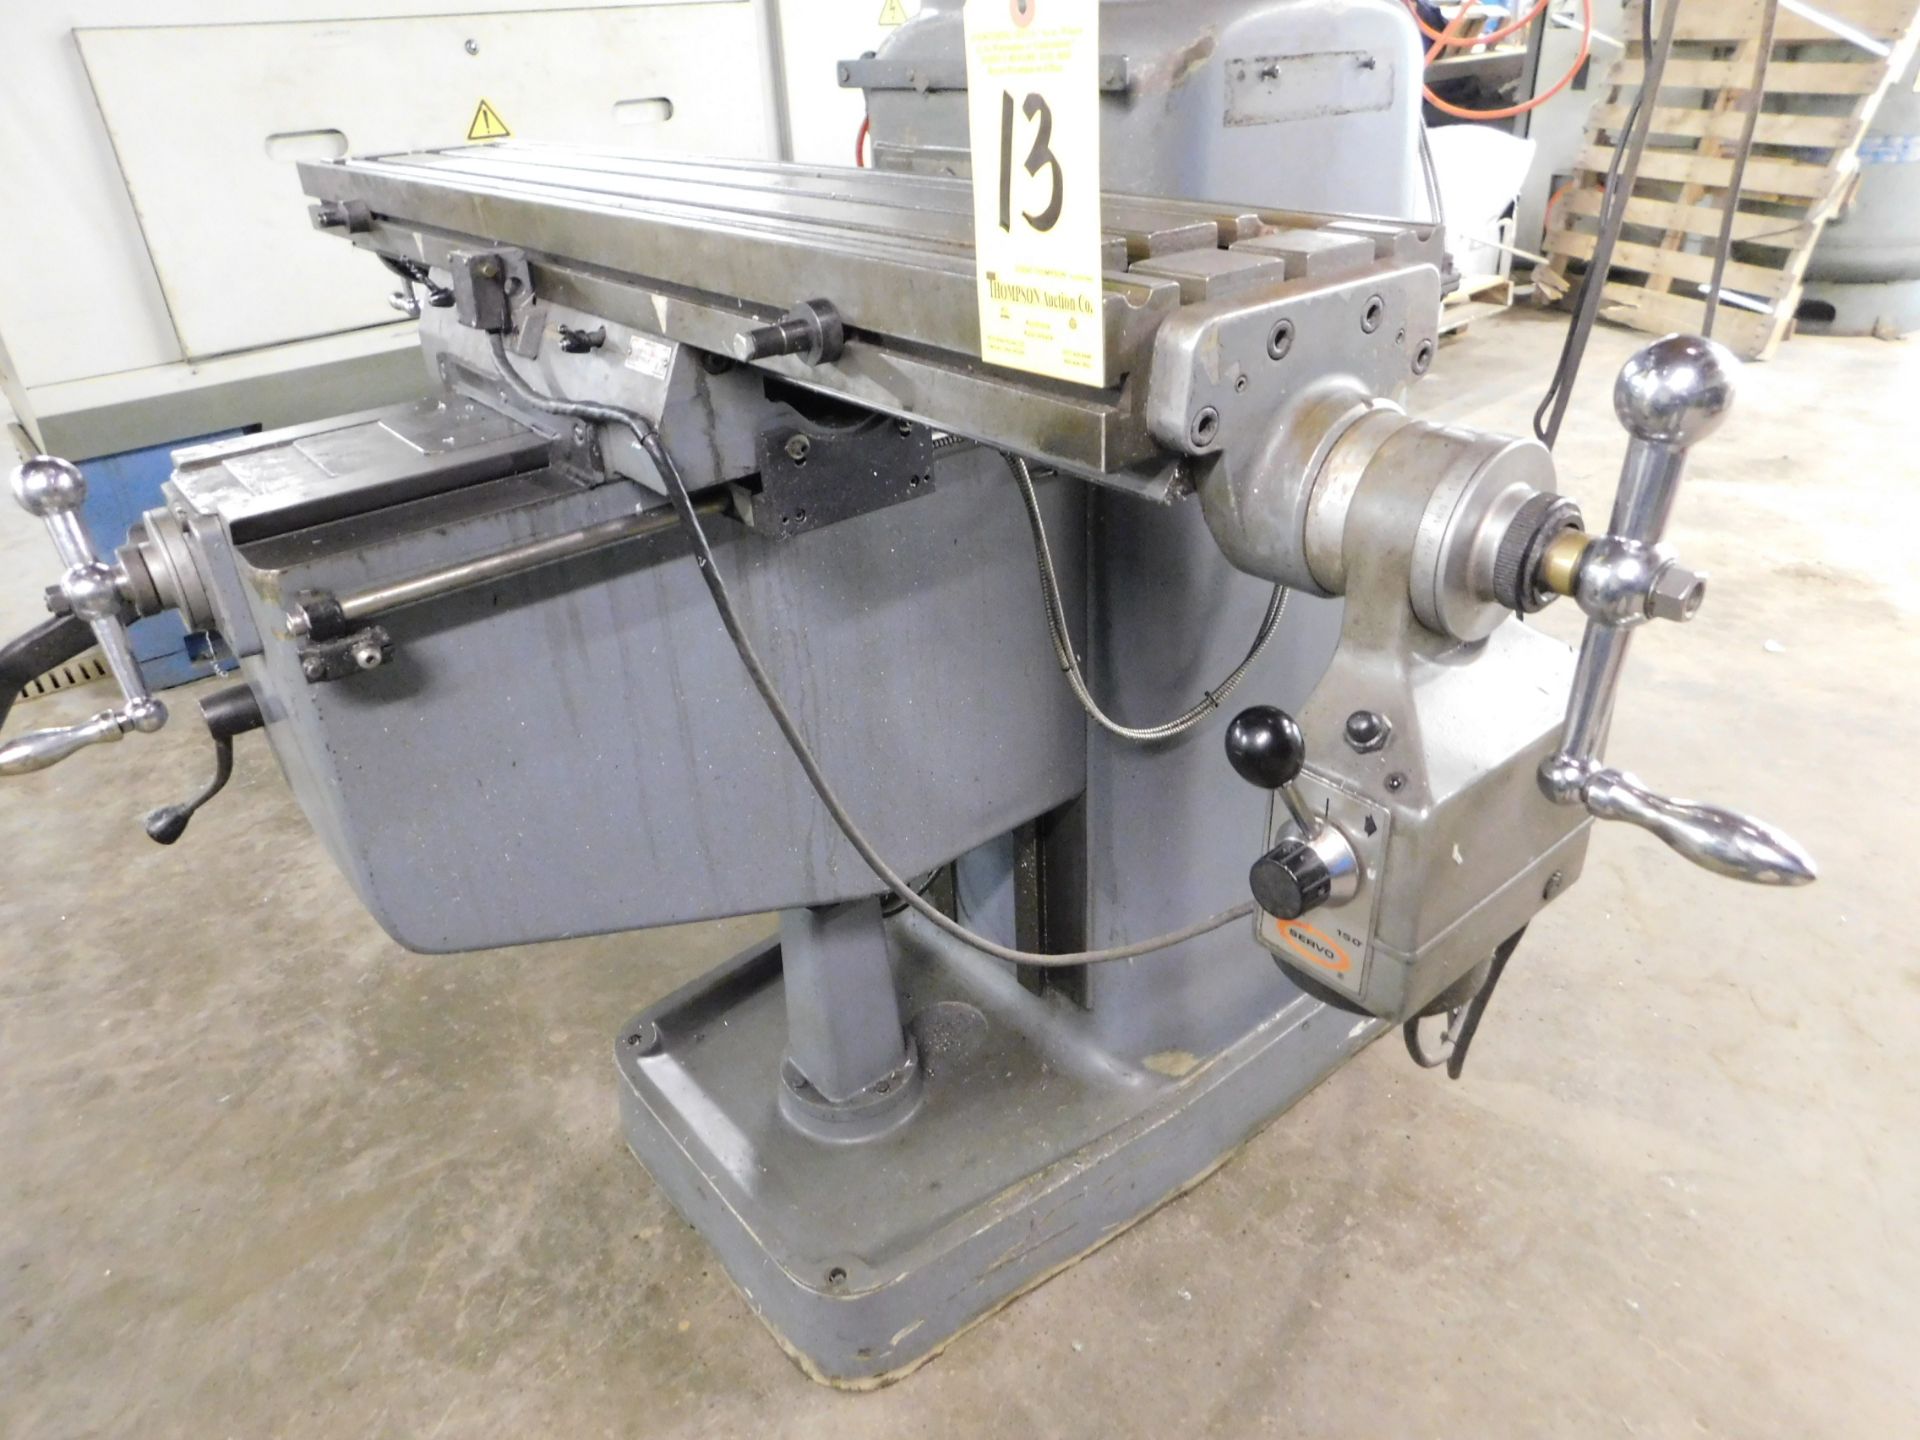 Clausing Kondia FV-1 Variable Speed Vertical Mill SN X-86, Servo Table Powerfeed, 9" x 48" Table, - Image 8 of 15